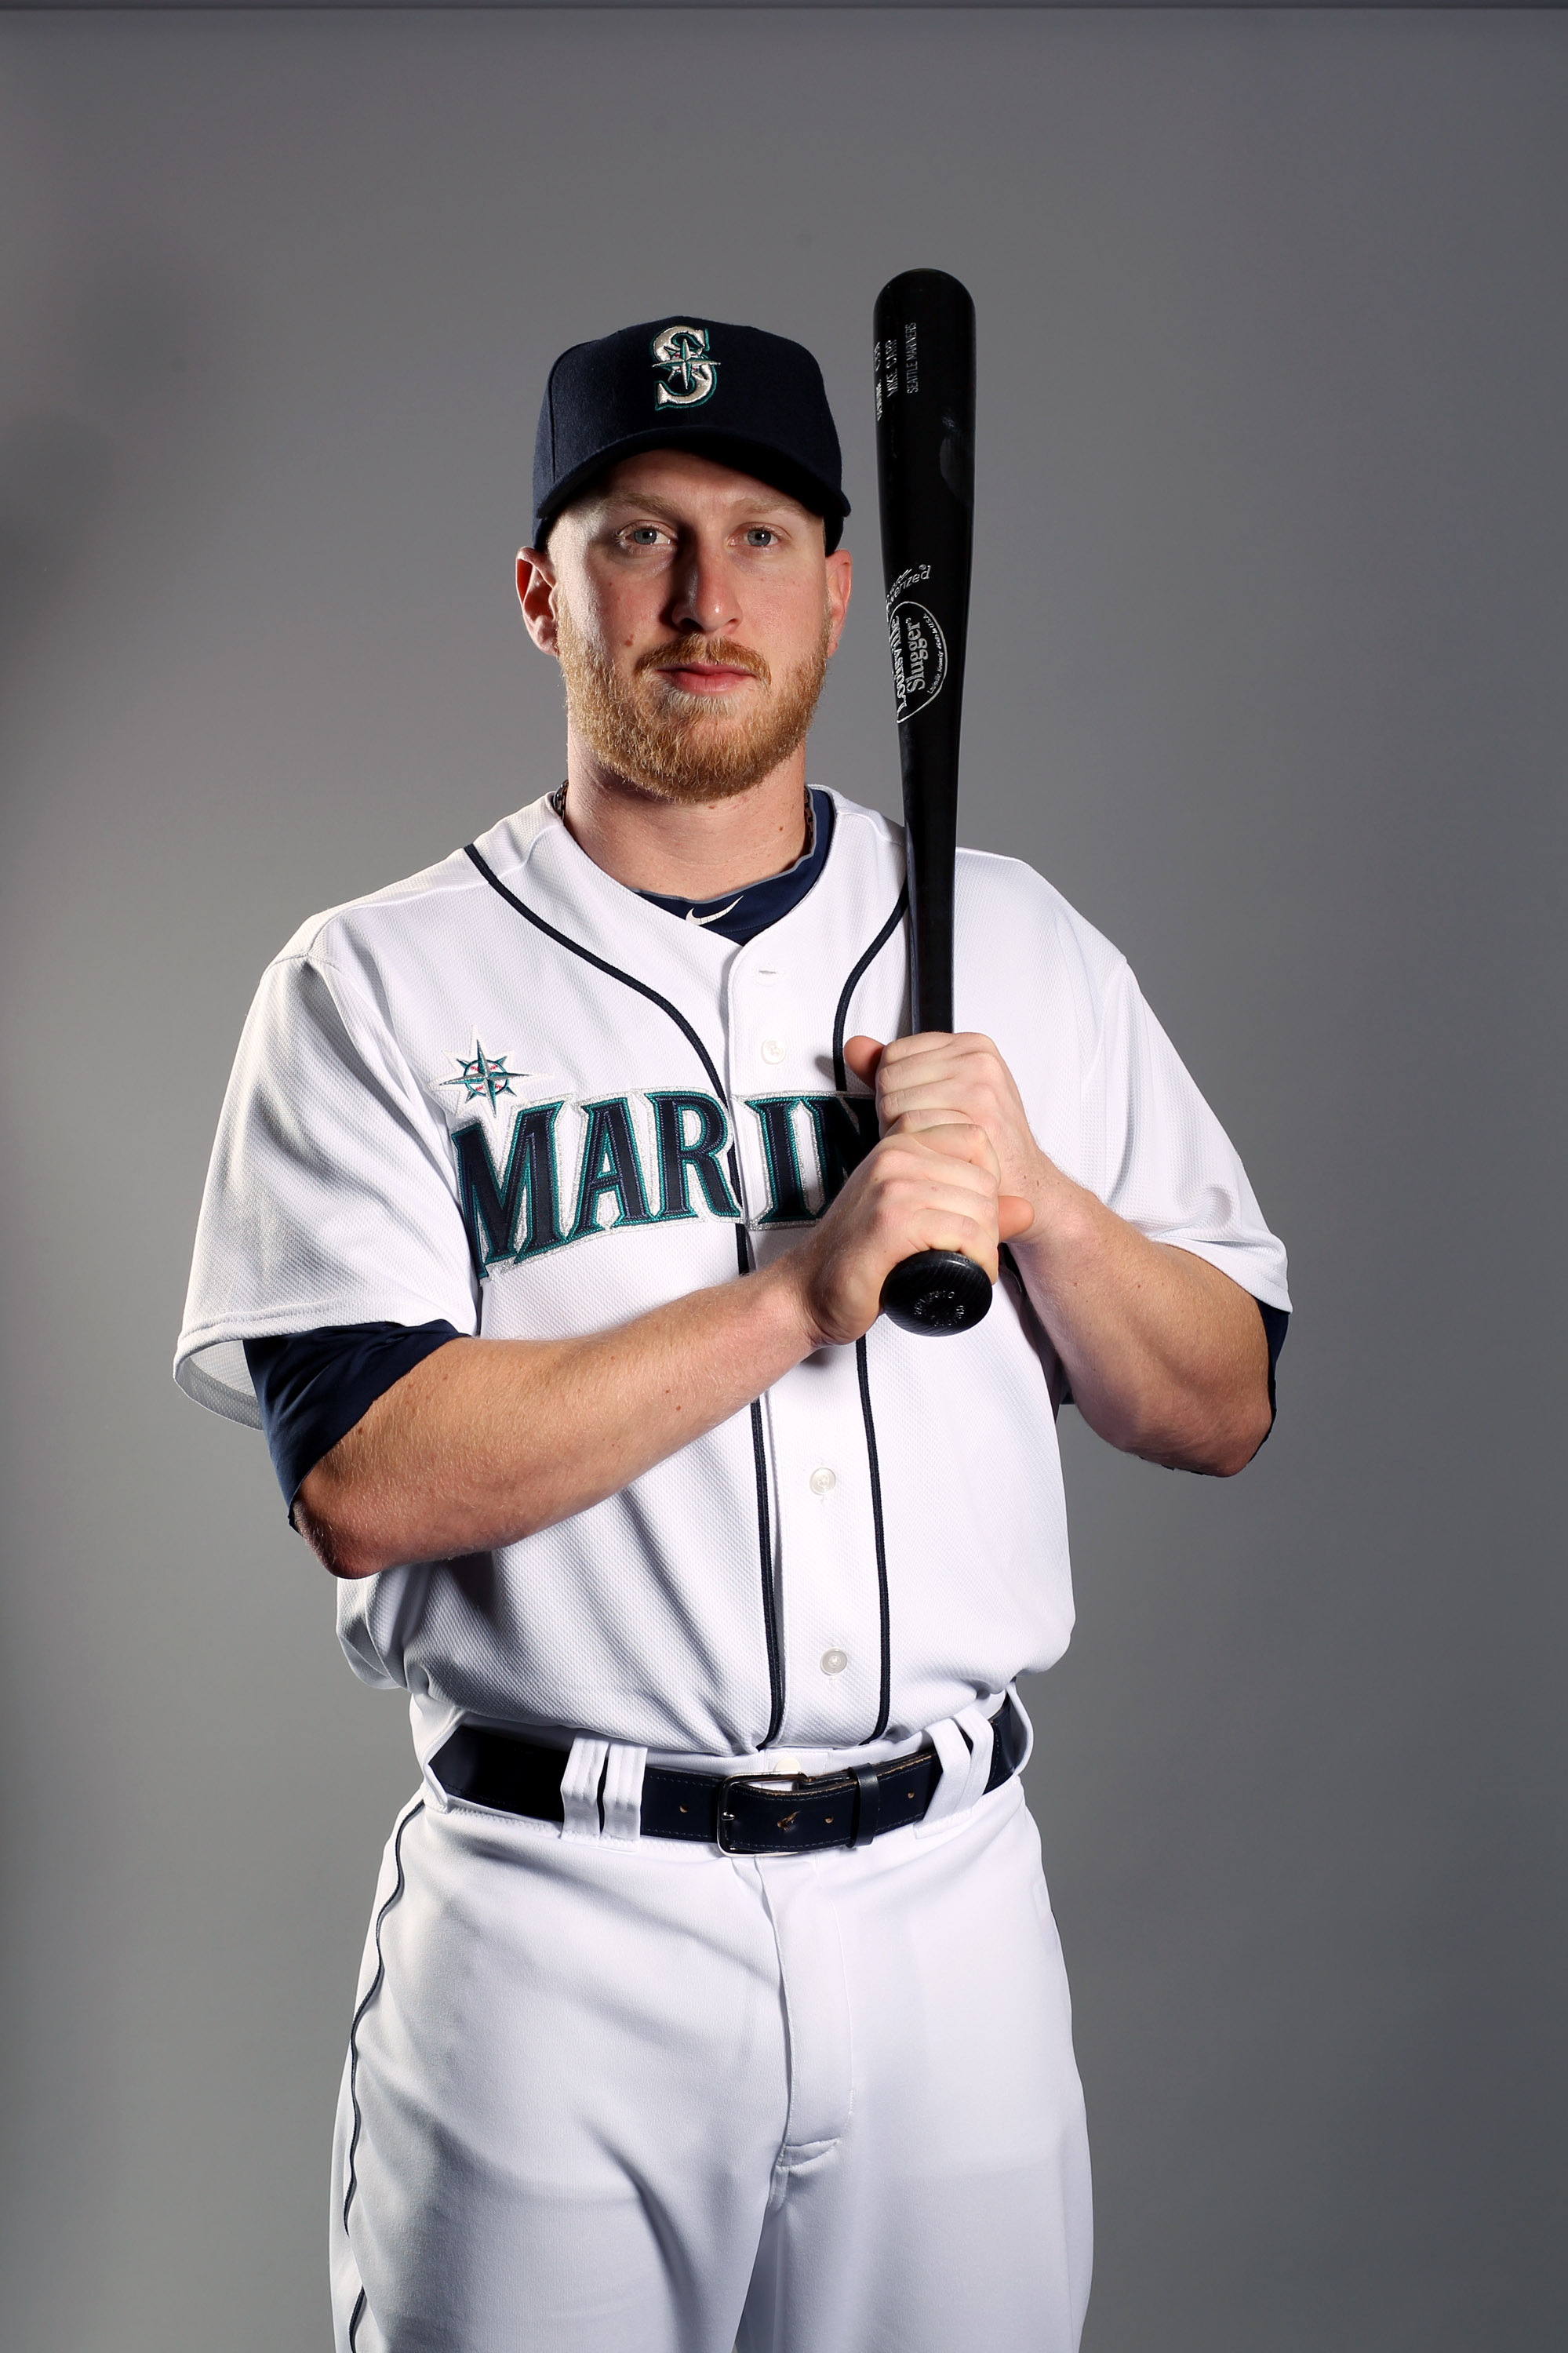 Outfielder Greg Halman of the Seattle Mariners at bat during a